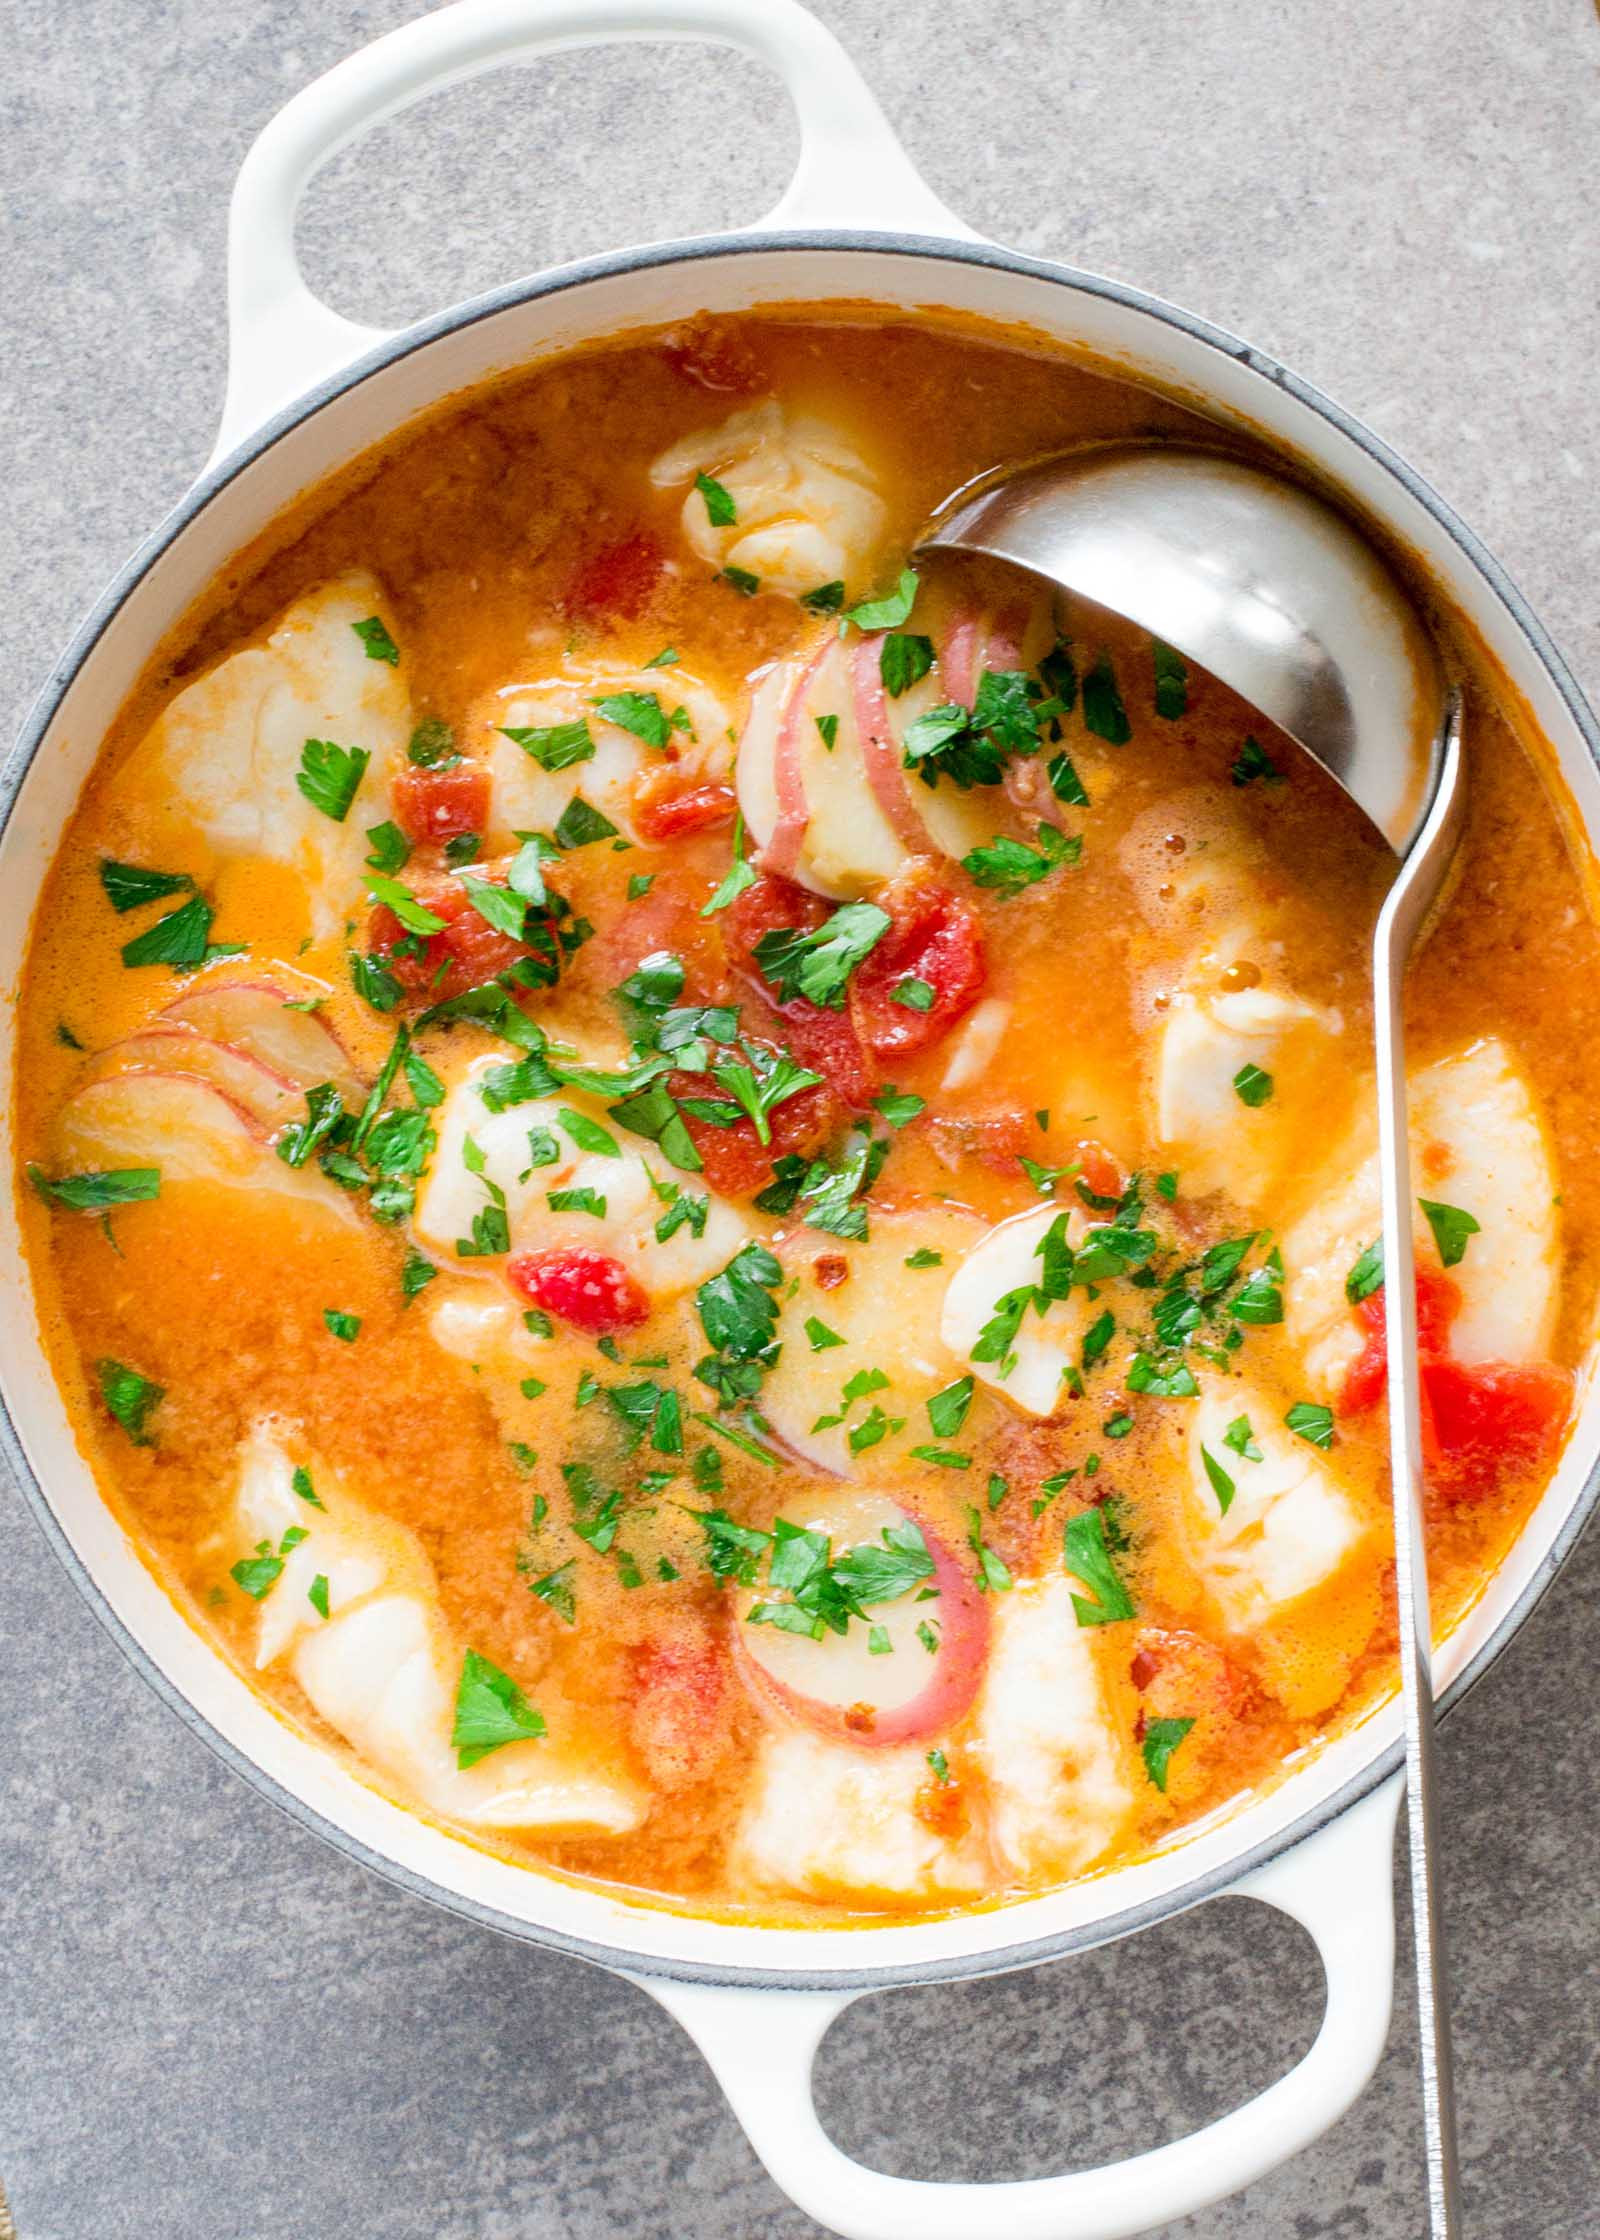 Recipes For Fish Soups
 Fish Stew with Ginger and Tomatoes Recipe